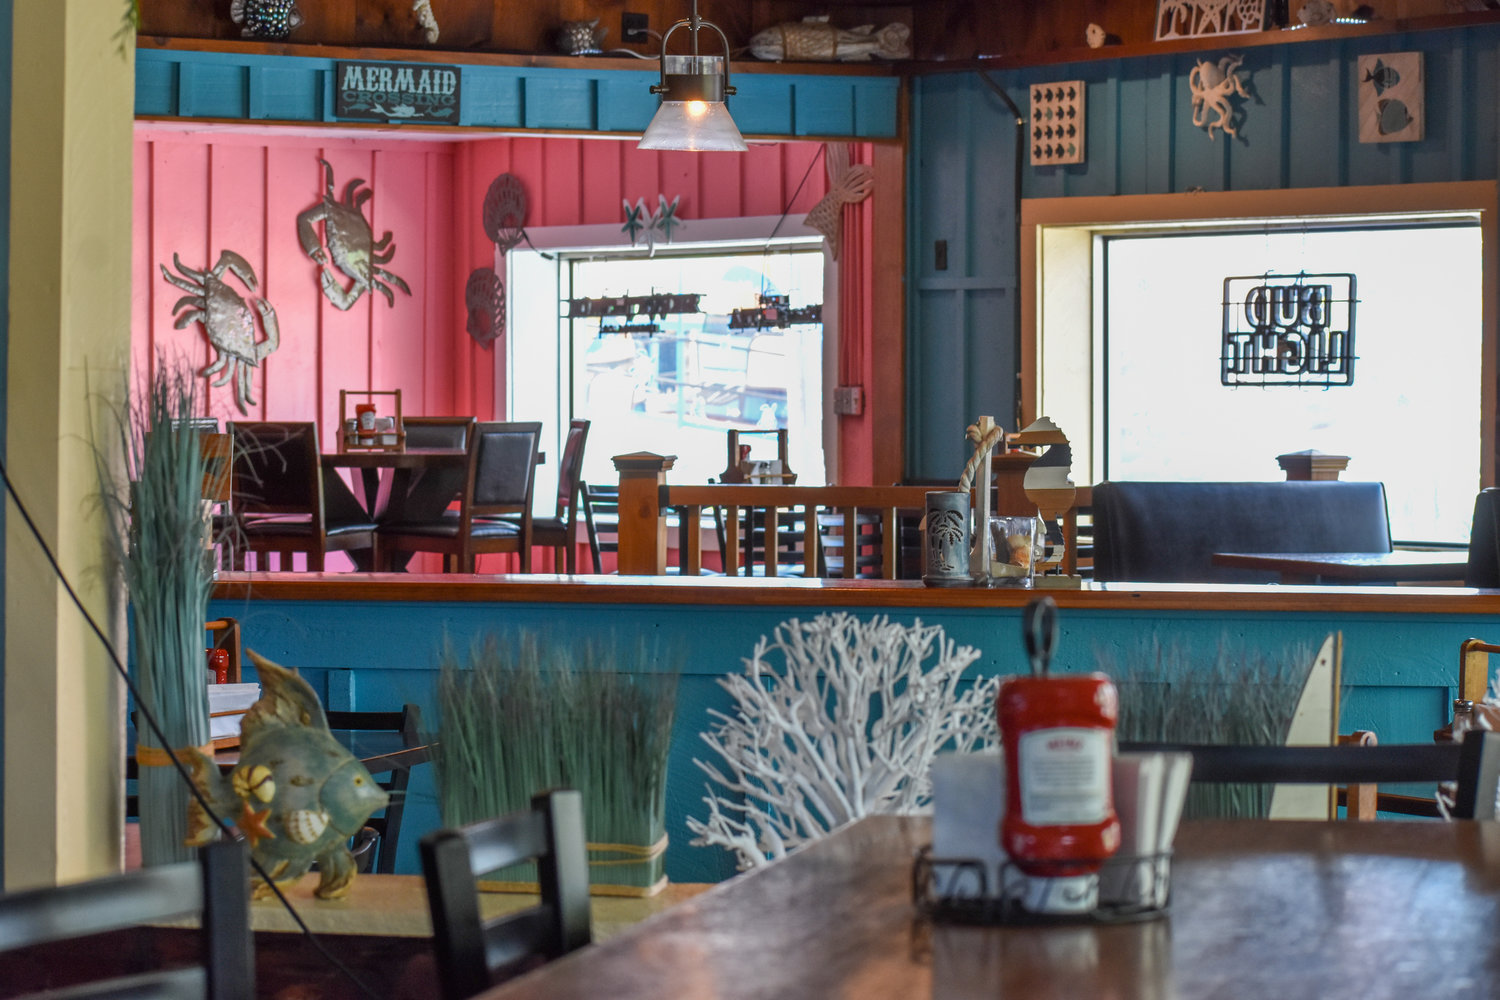 The interior of the Crazy Clam has been refreshed with new paint and beach-themed decor.